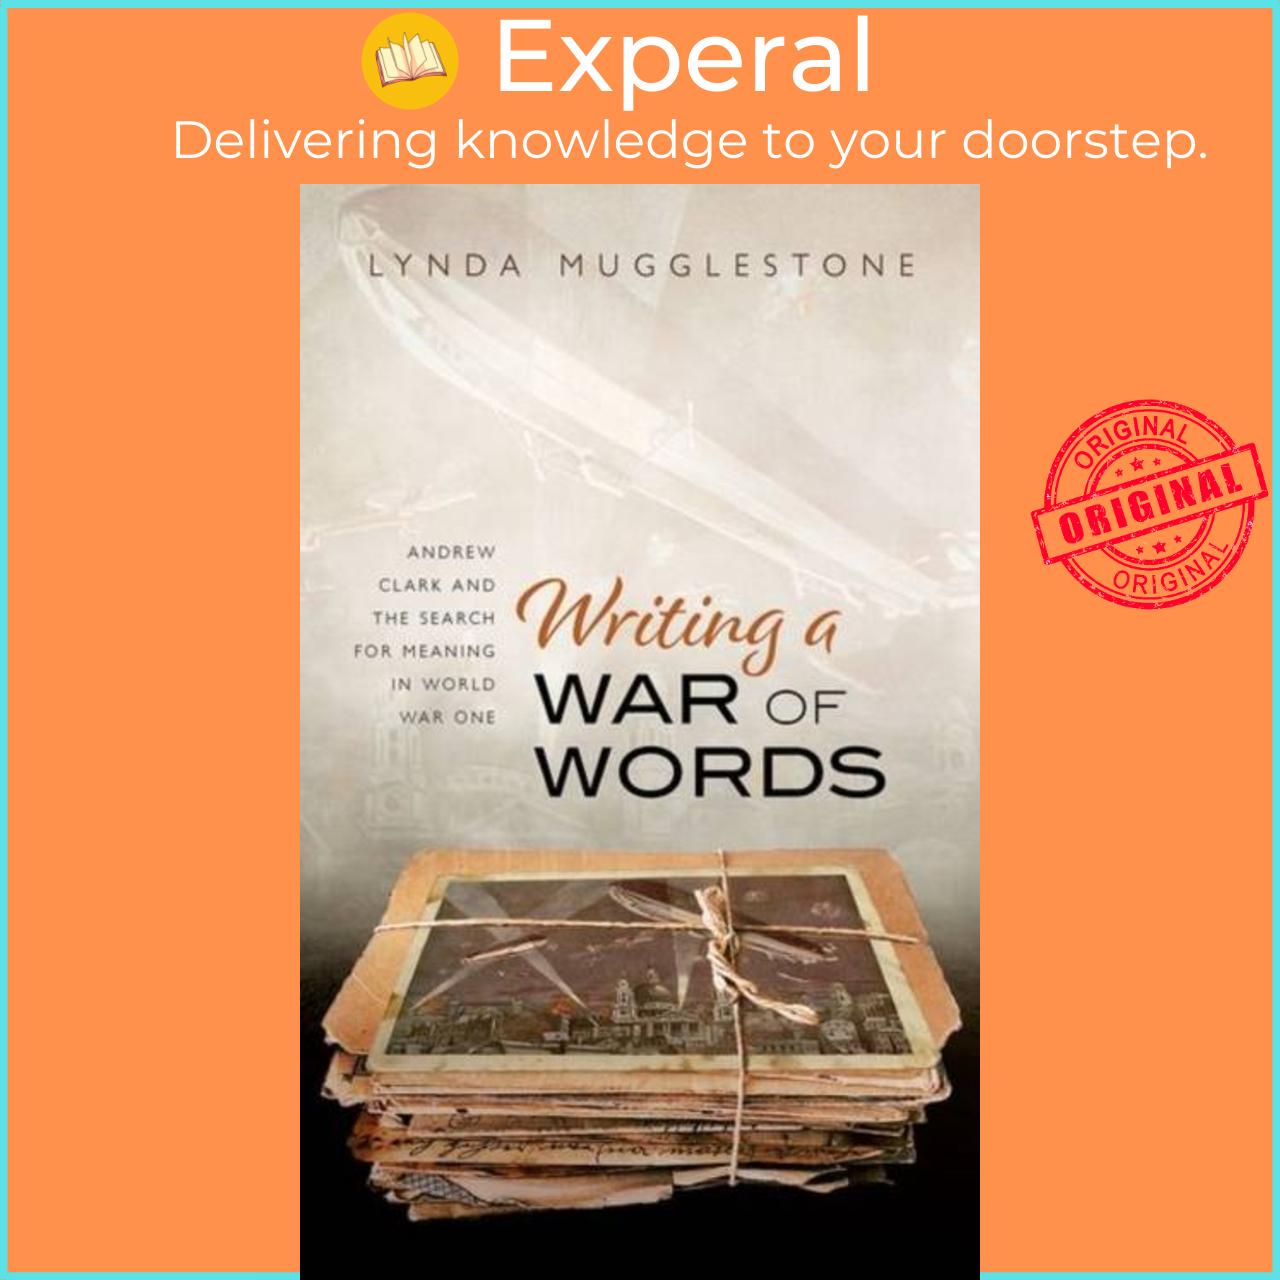 Sách - Writing a War of Words - Andrew Clark and the Search for Meaning in  by Lynda Mugglestone (UK edition, hardcover)